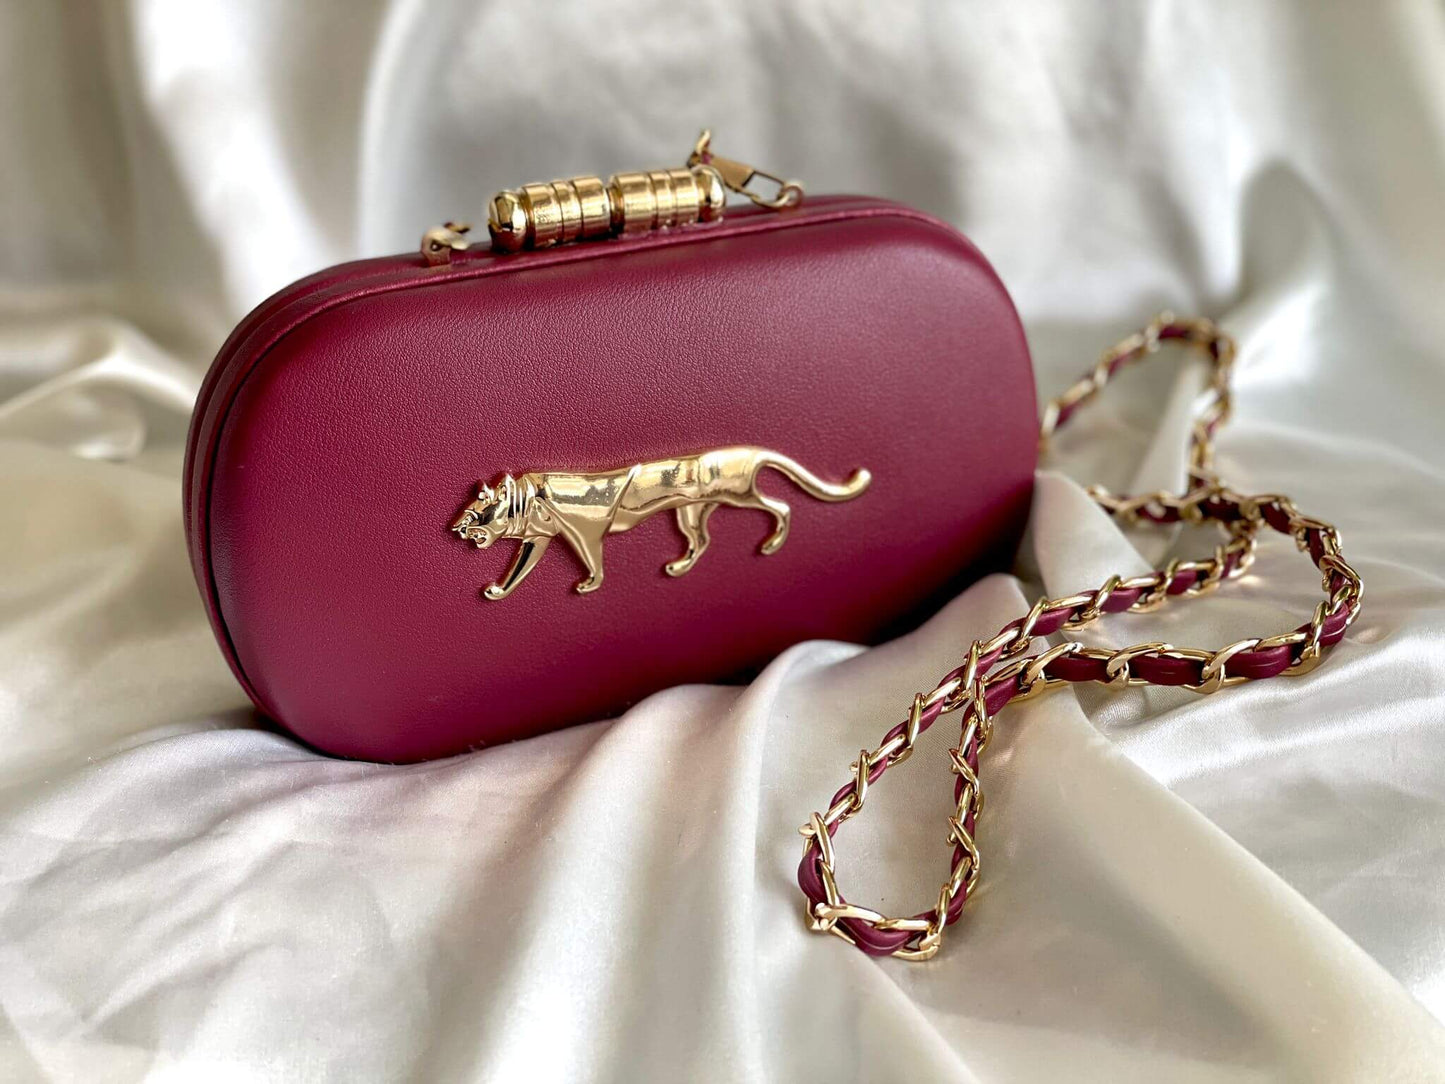 Elegant Maroon Clutch for Evening Events